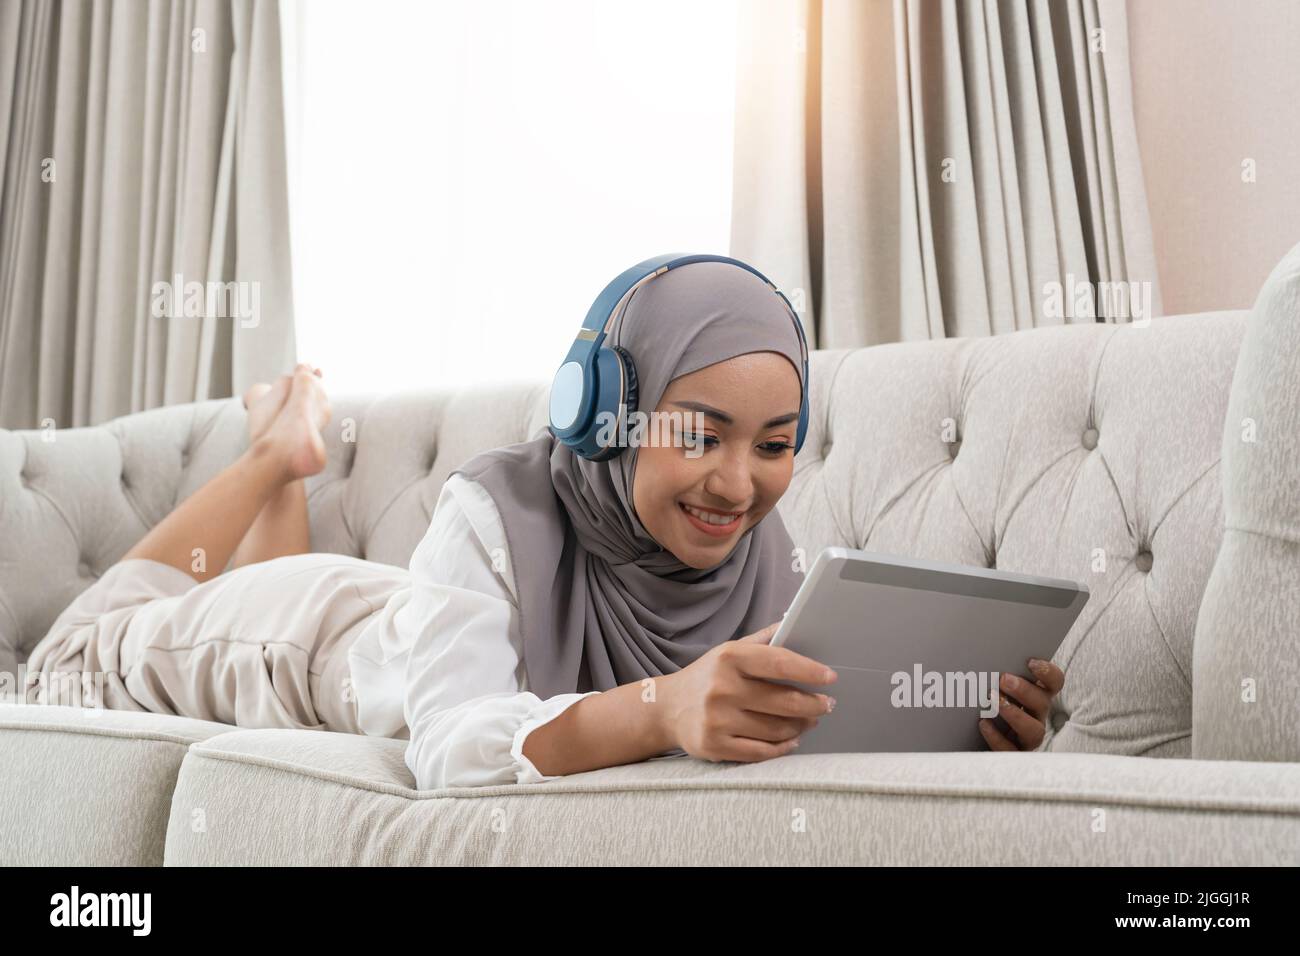 full length view of young muslim woman laying on couch in living room and watching movie on digital tablet Stock Photo